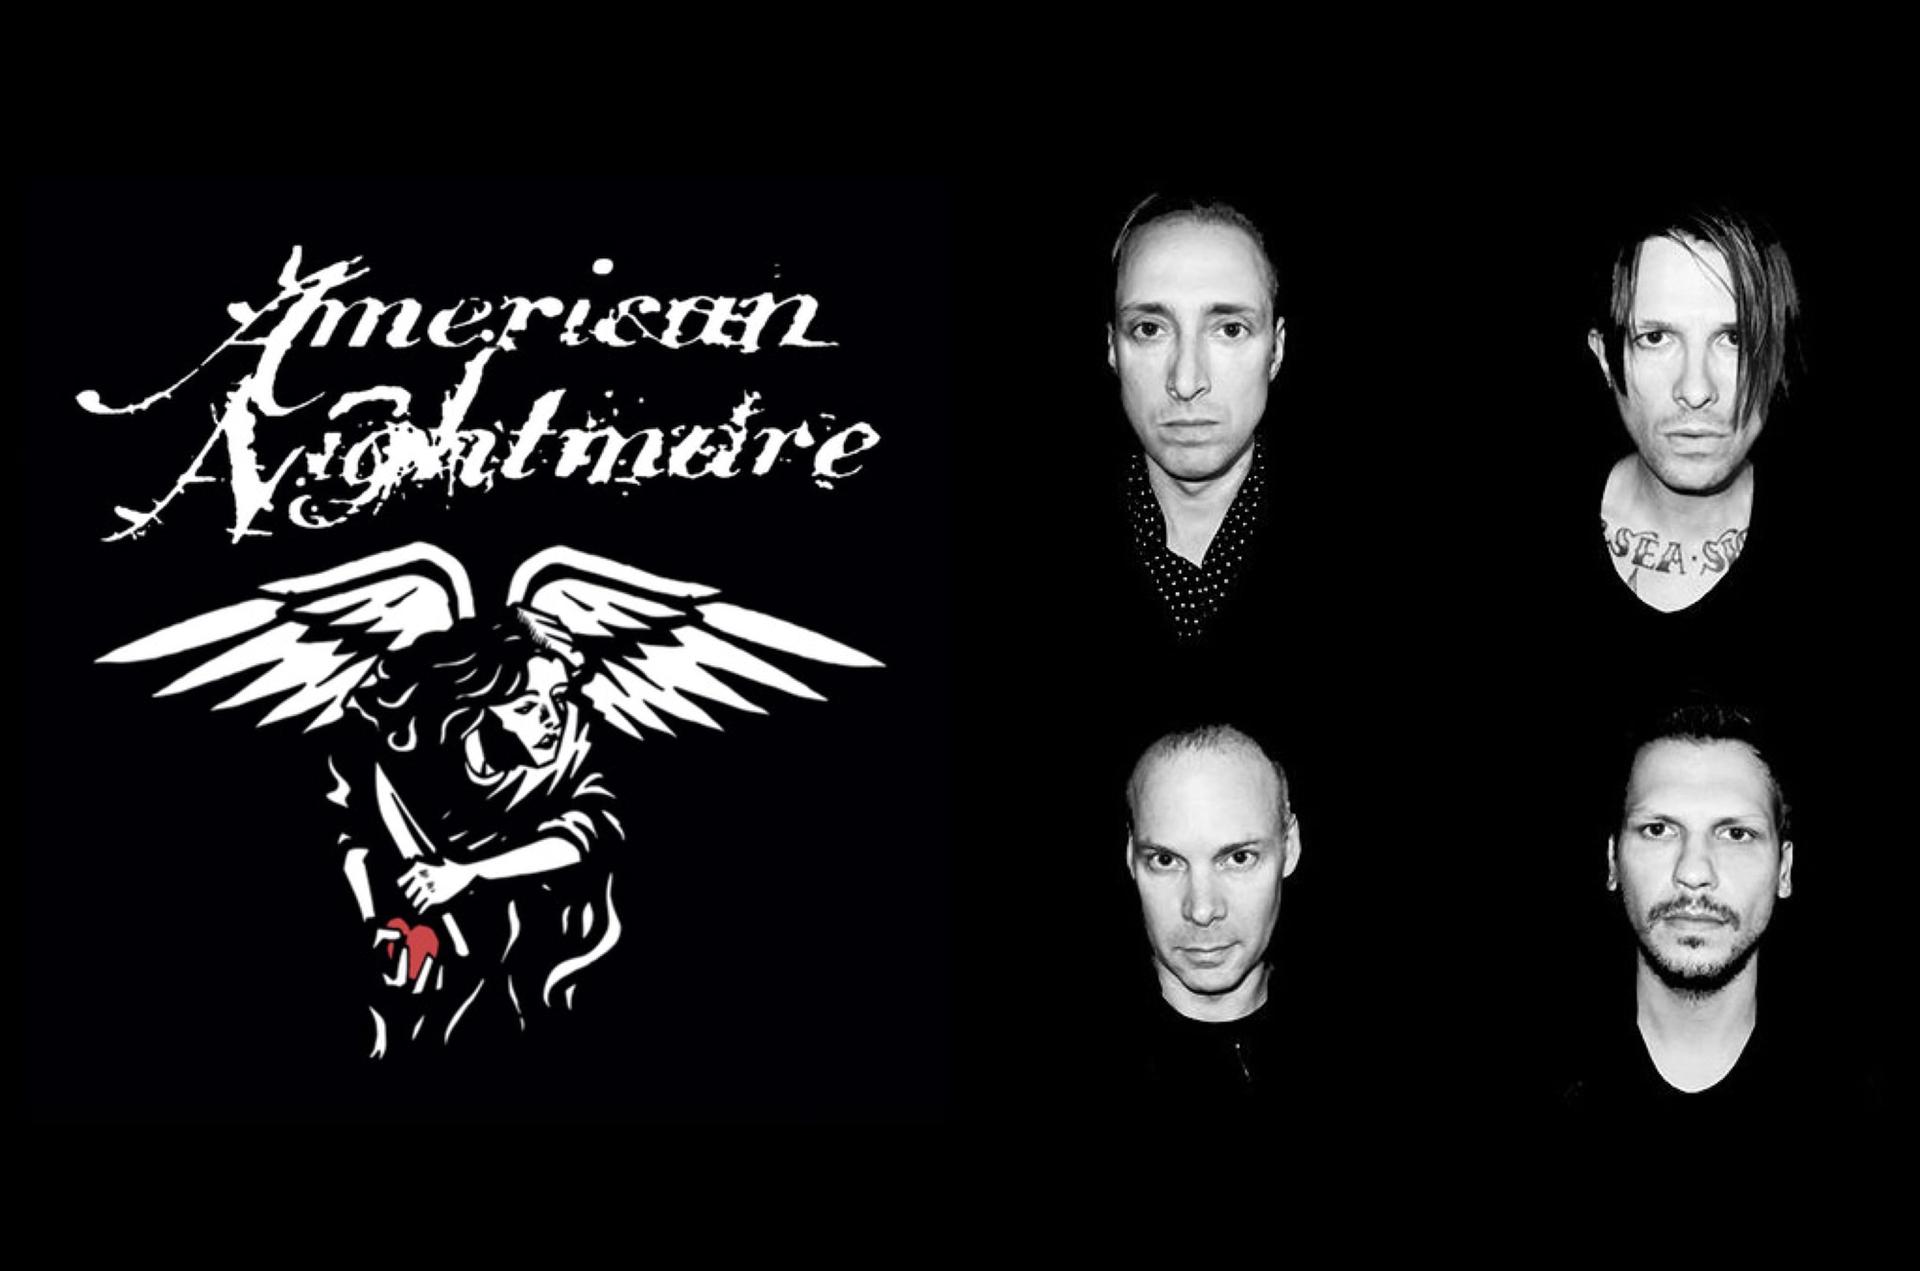 American Nightmare logo (Left) and promotional photo (Right) courtesy of Rise Records.